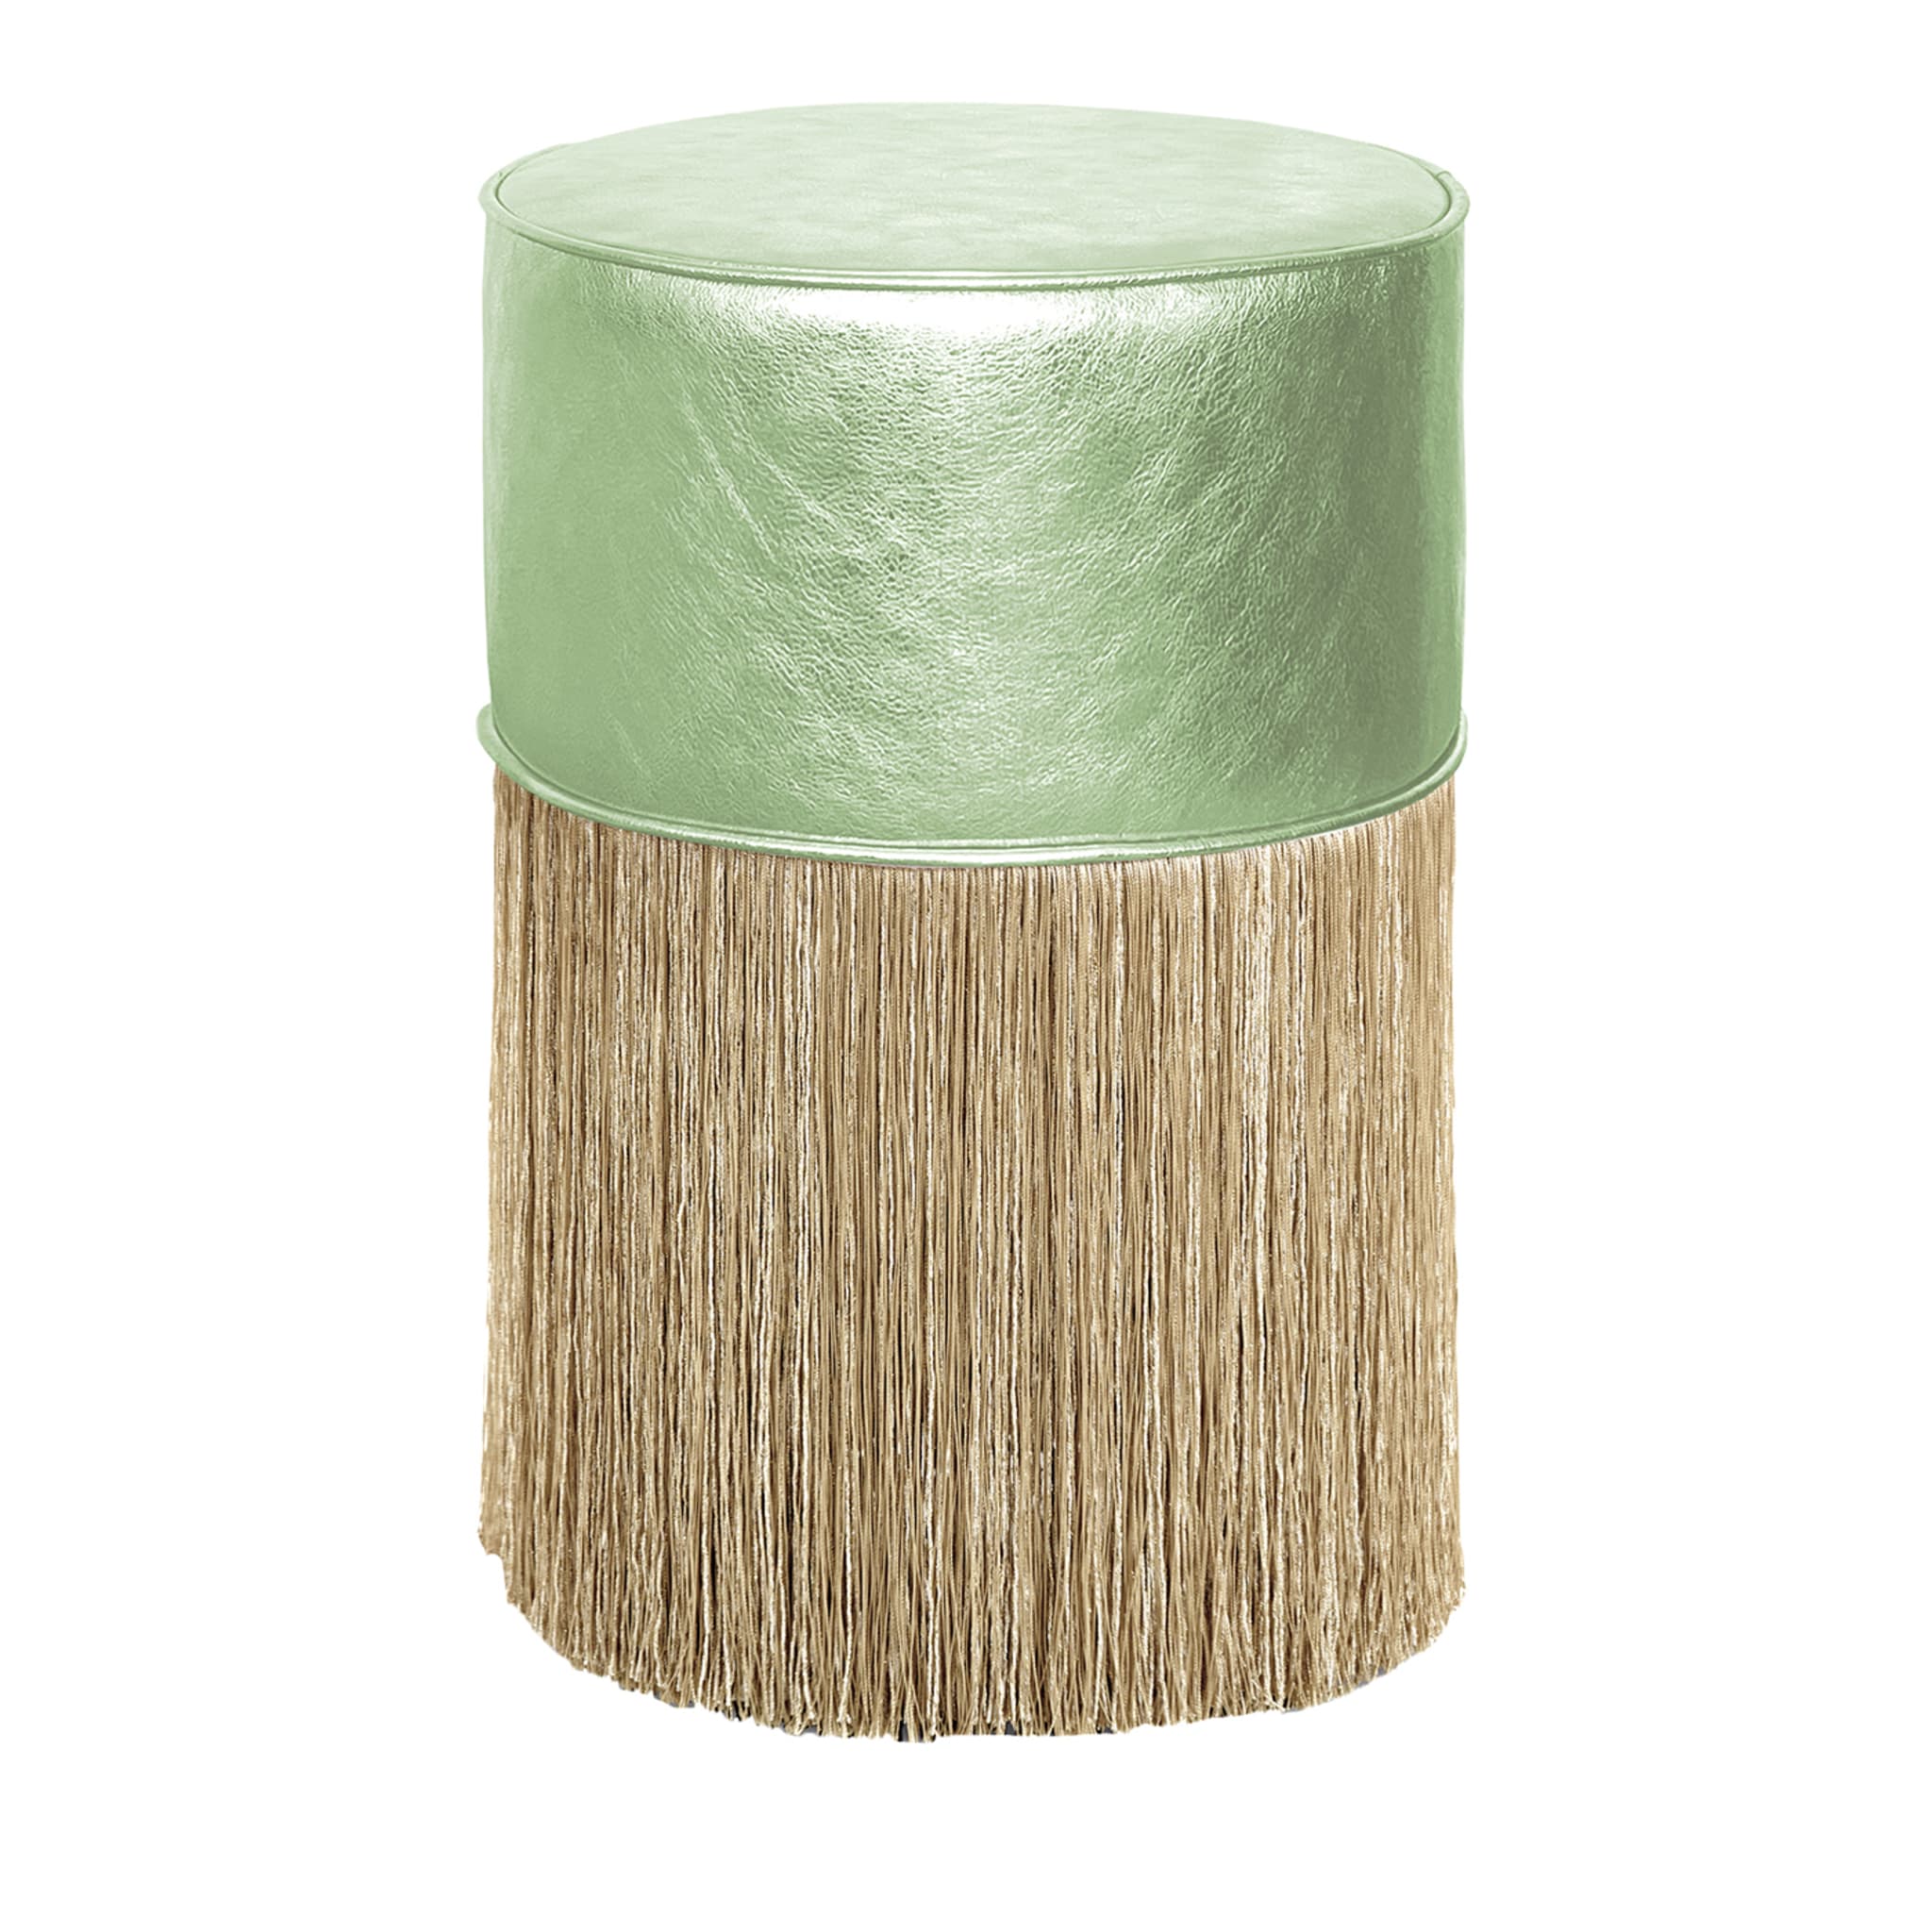 Gleaming Light Green Leather Gold Fringes Pouf by Lorenza Bozzoli - Main view